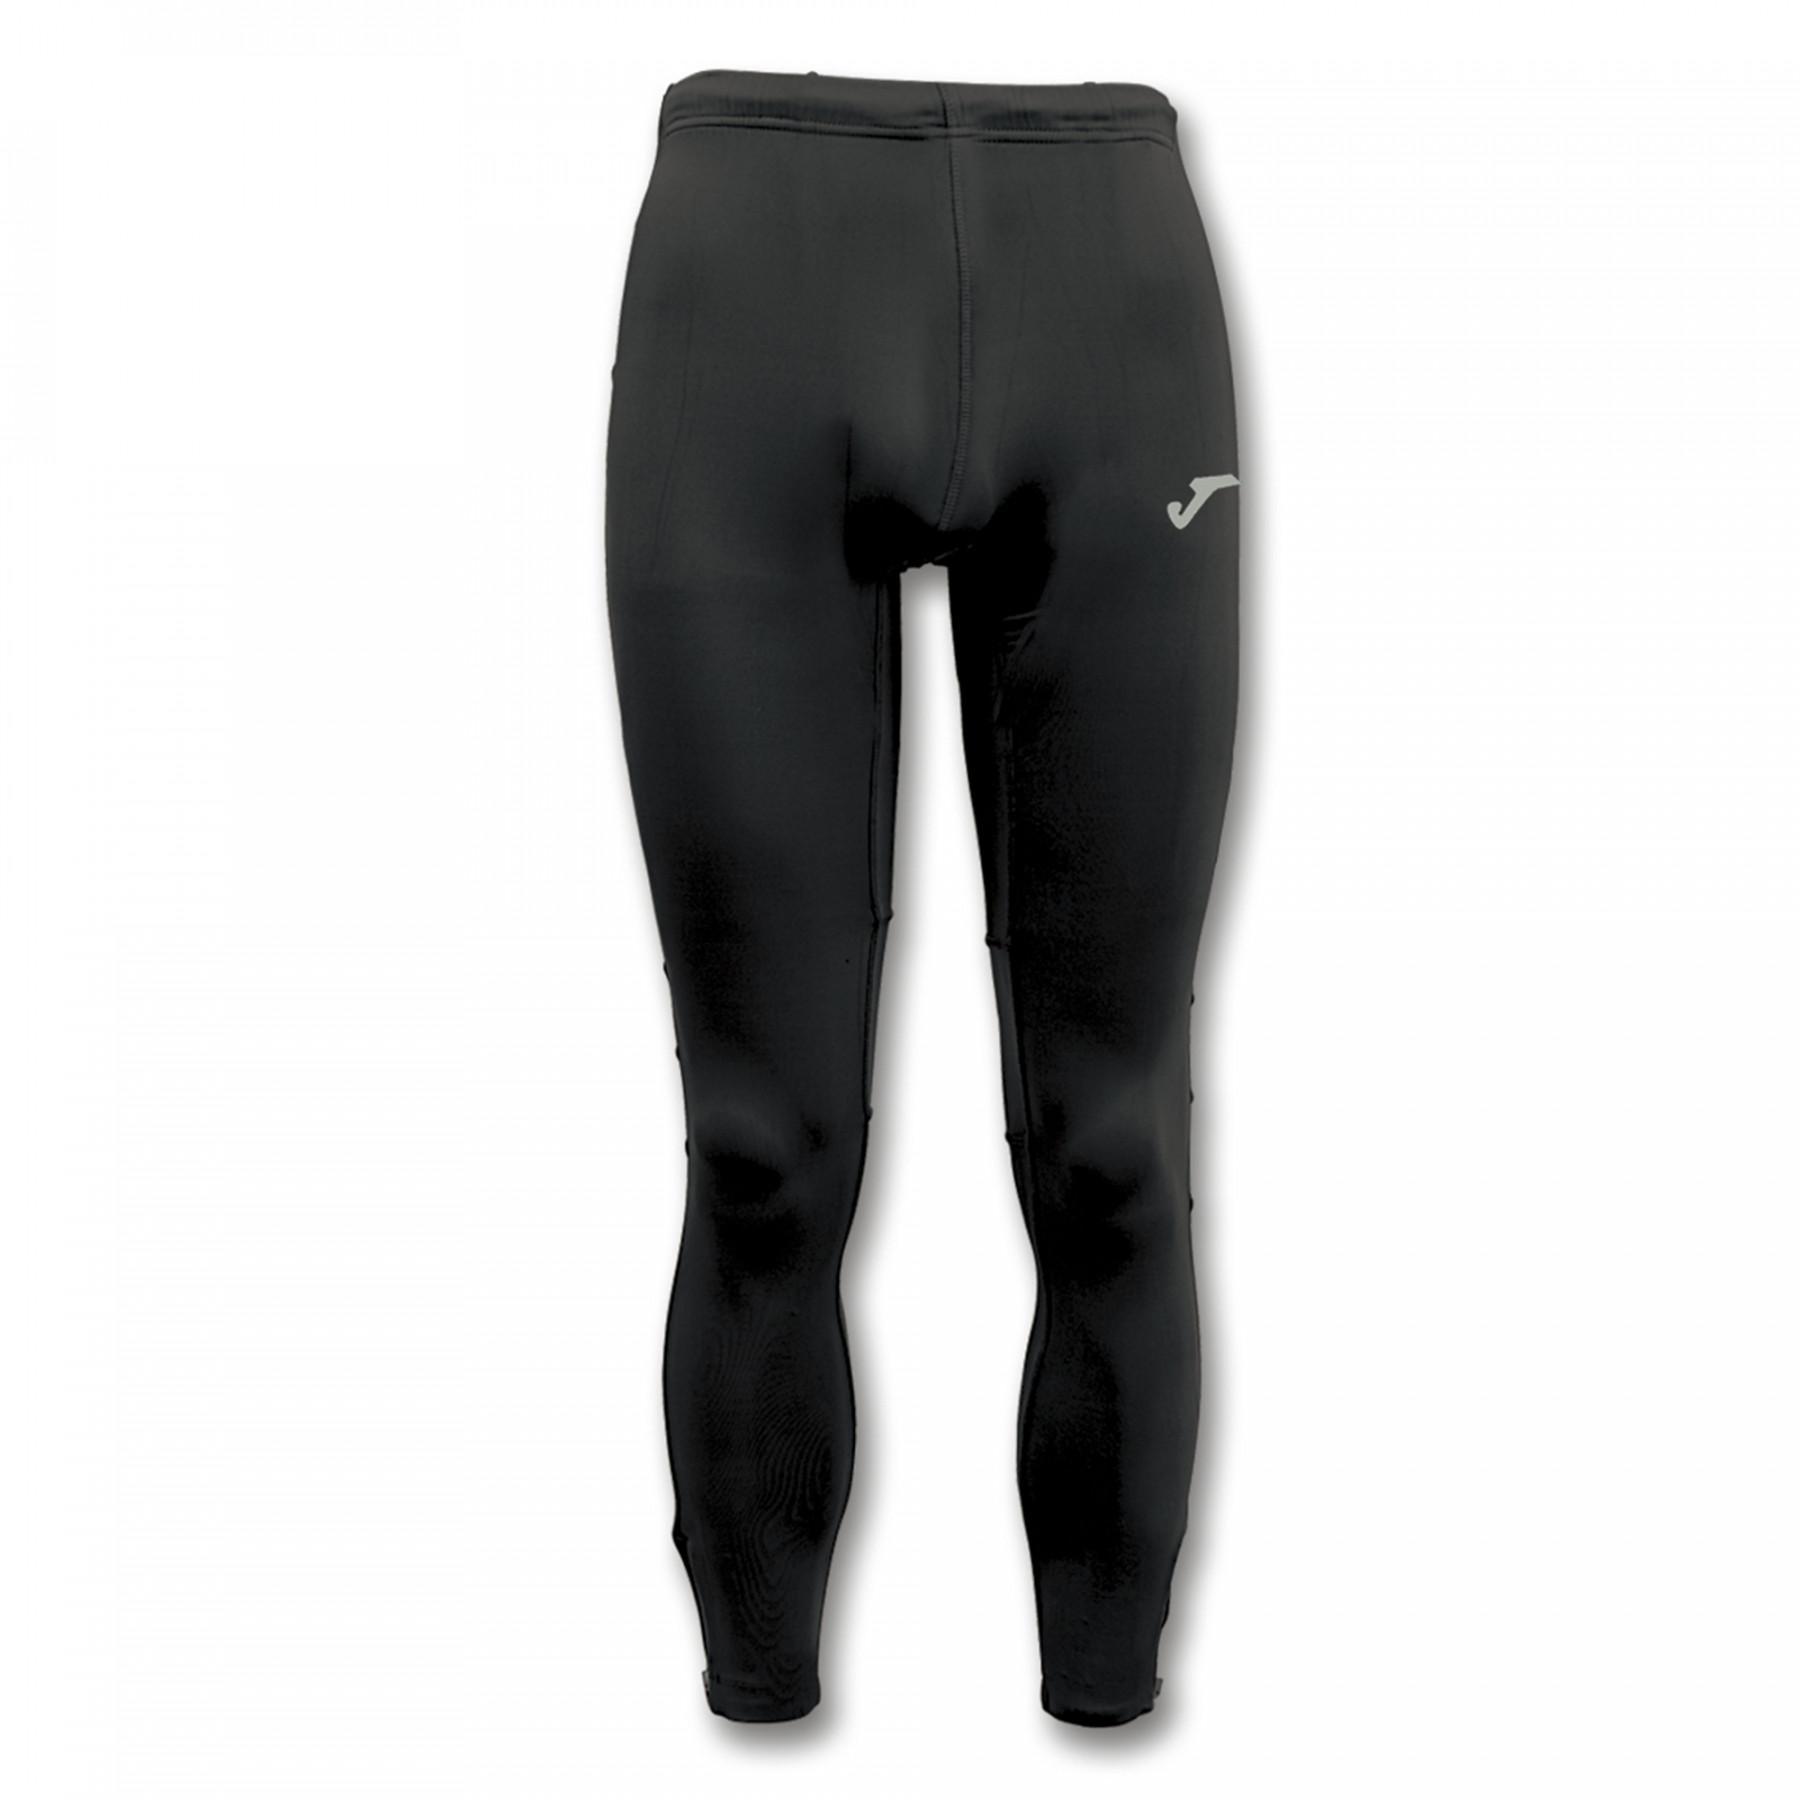 Joma Jordan - Compression tights with flat seams to avoid